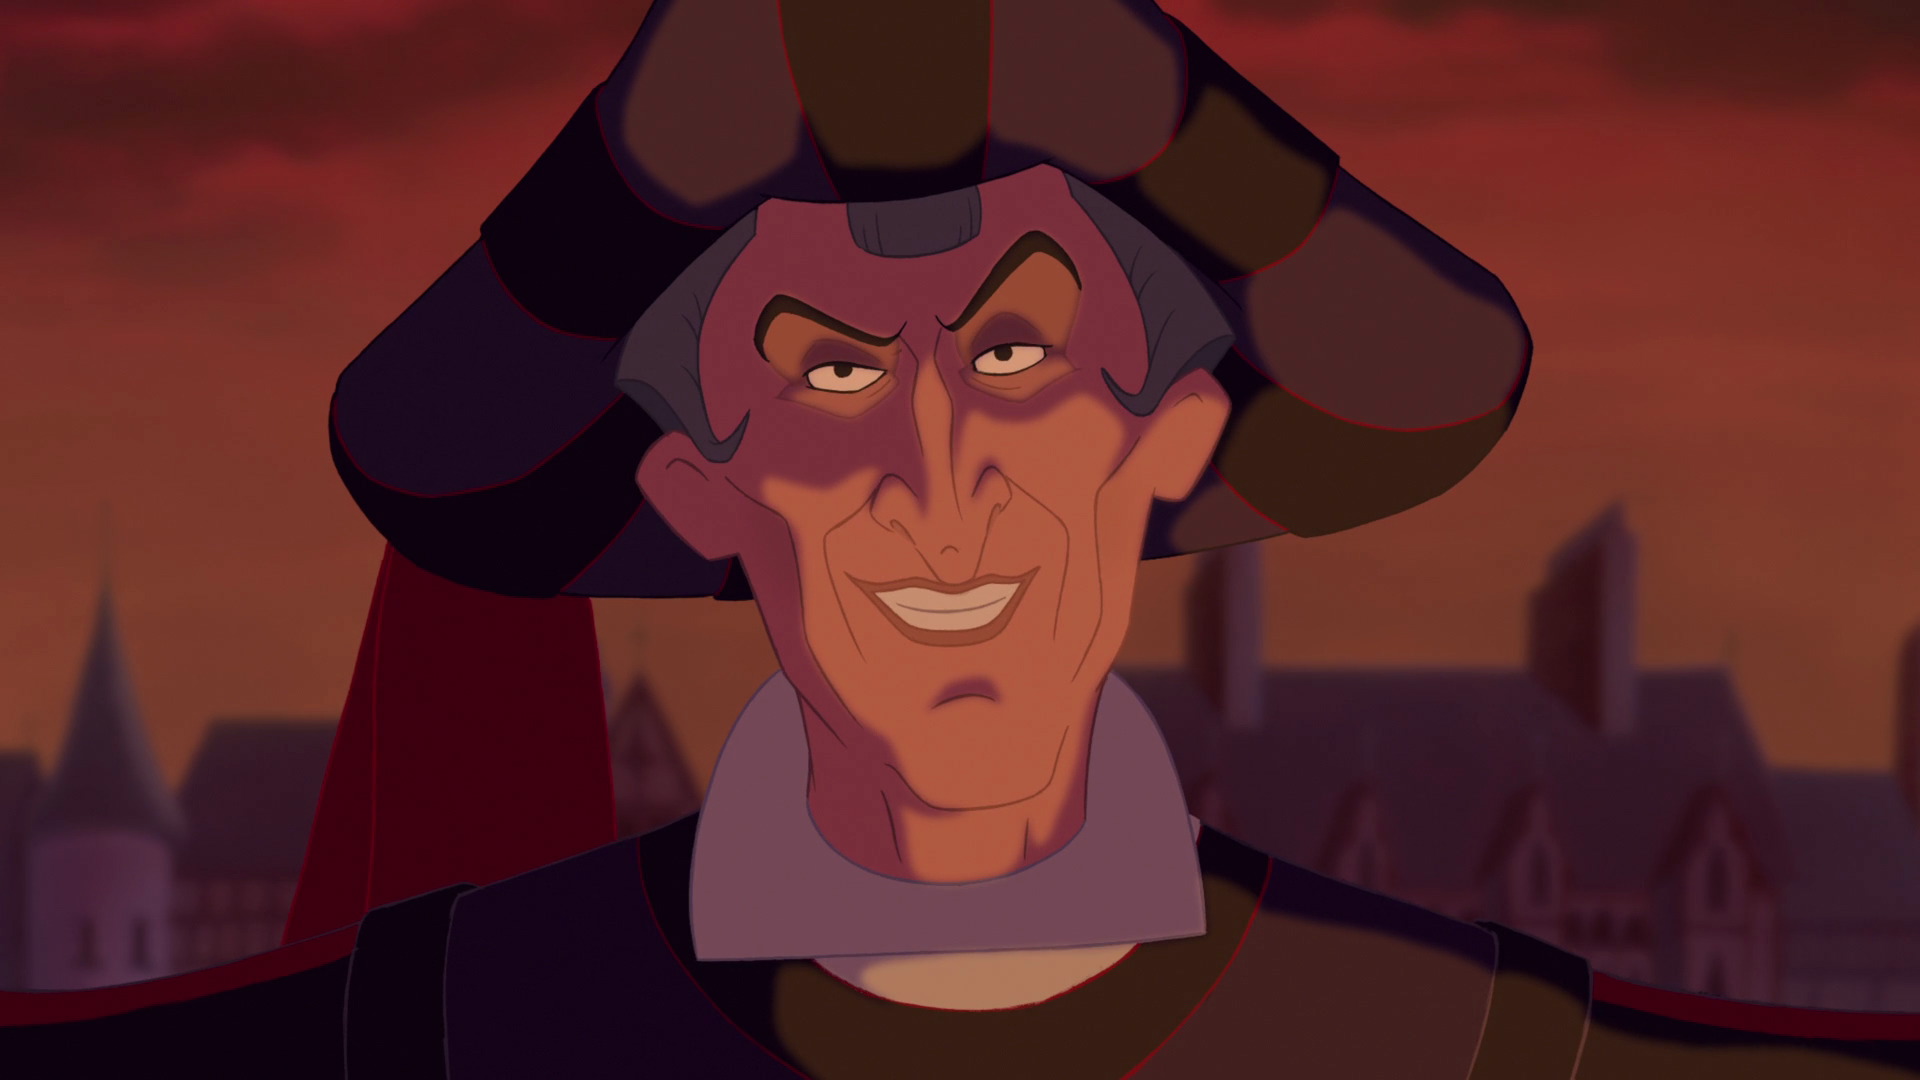 Who is Frollo based on?